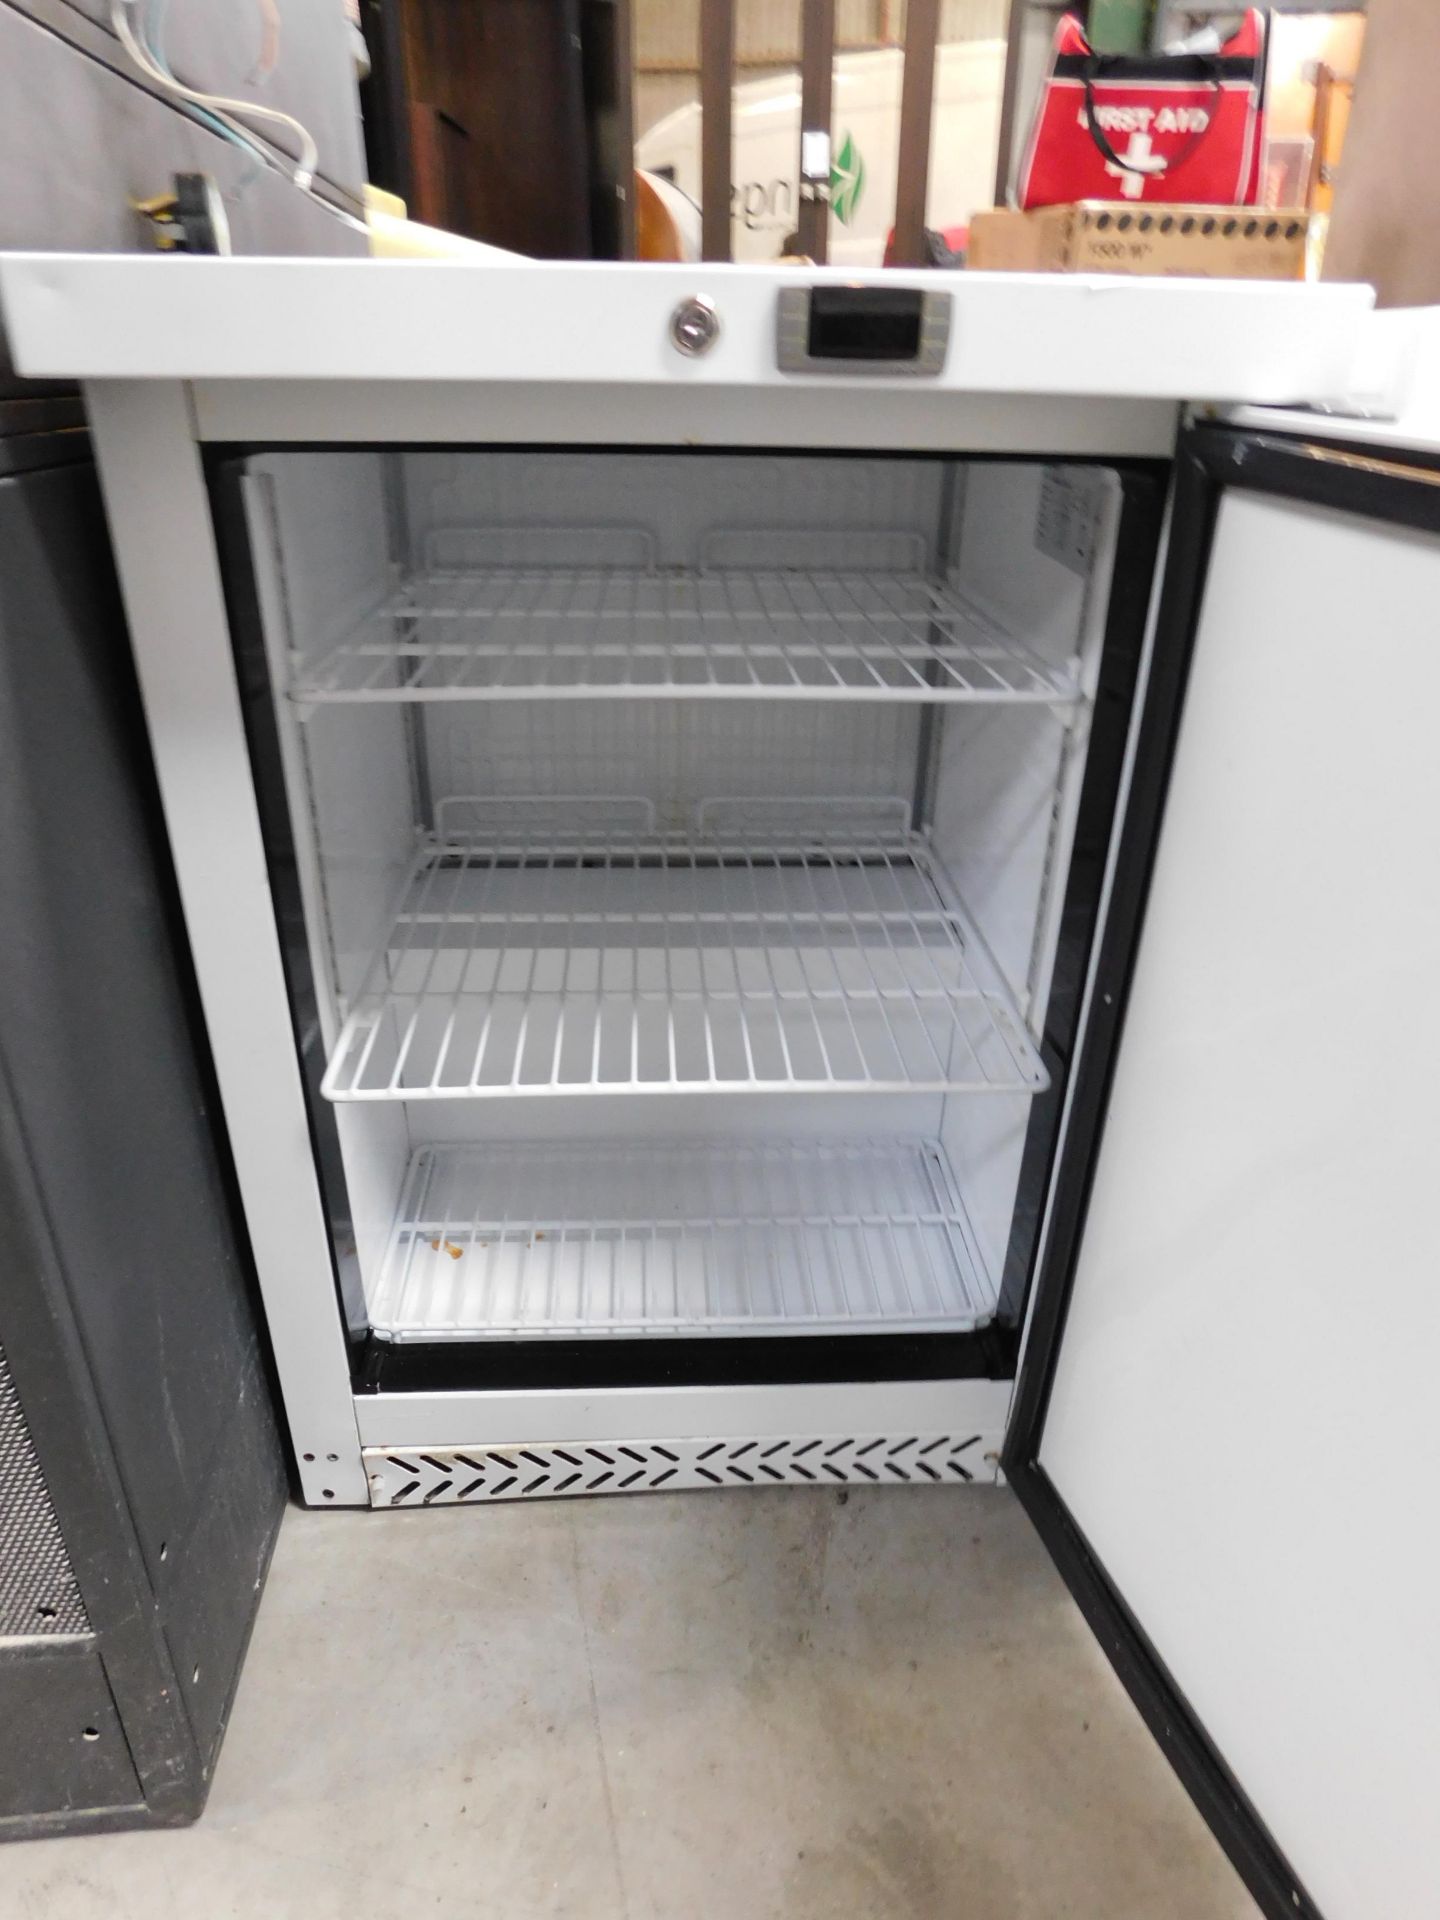 BR200.HD Under-Counter Fridge, Serial Number BR200HD2017STI301055 - Image 2 of 3